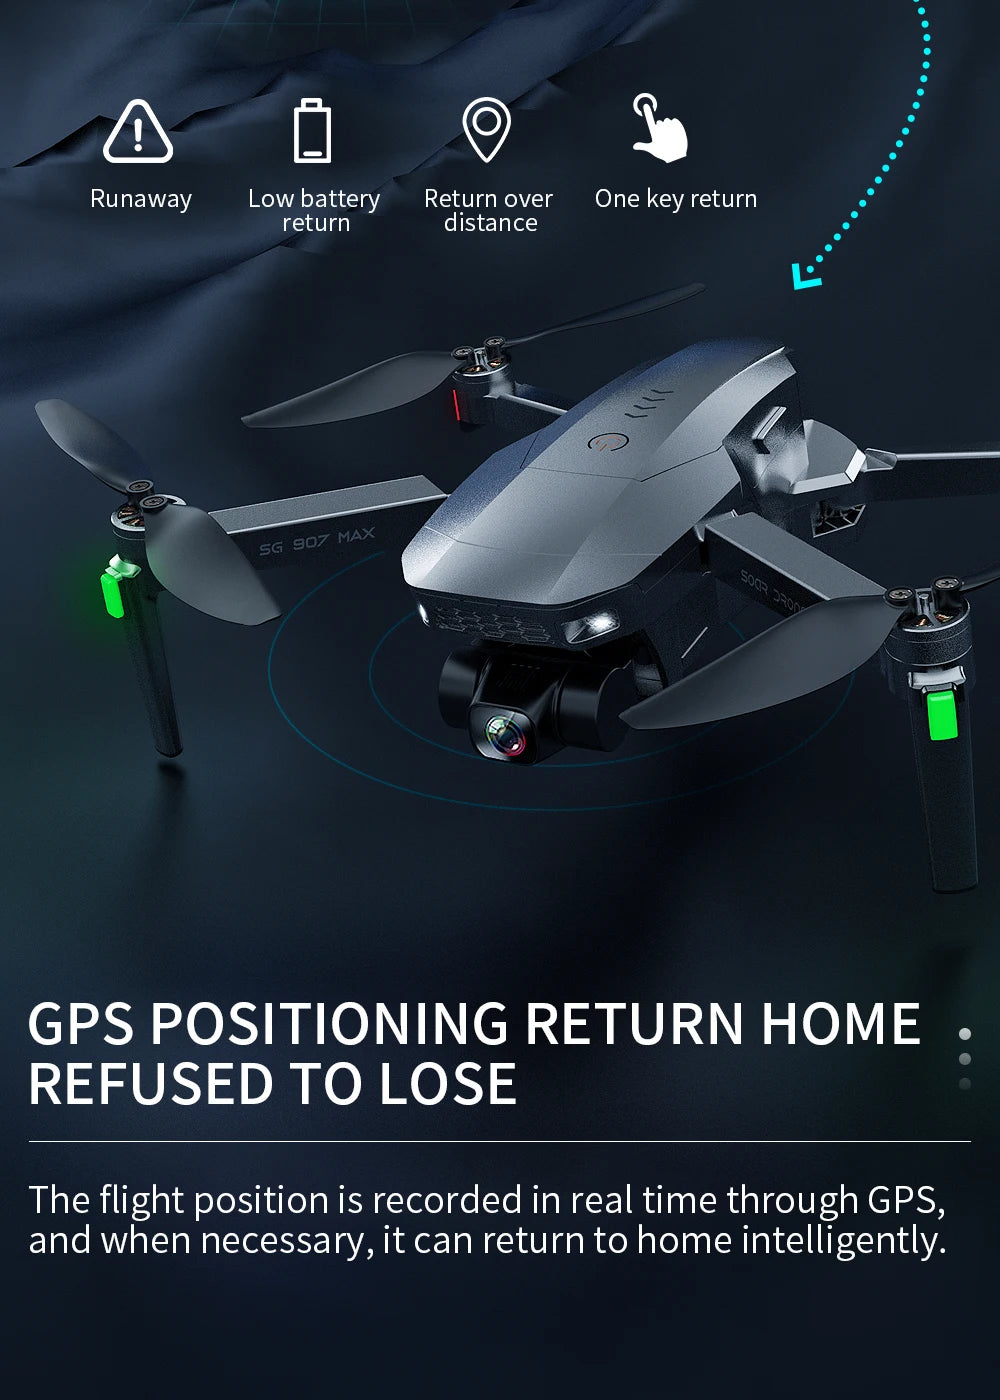 SG907 MAX GPS Drone, SG GPS POSITIONING RETURN HOME REFUSED TO LOSE